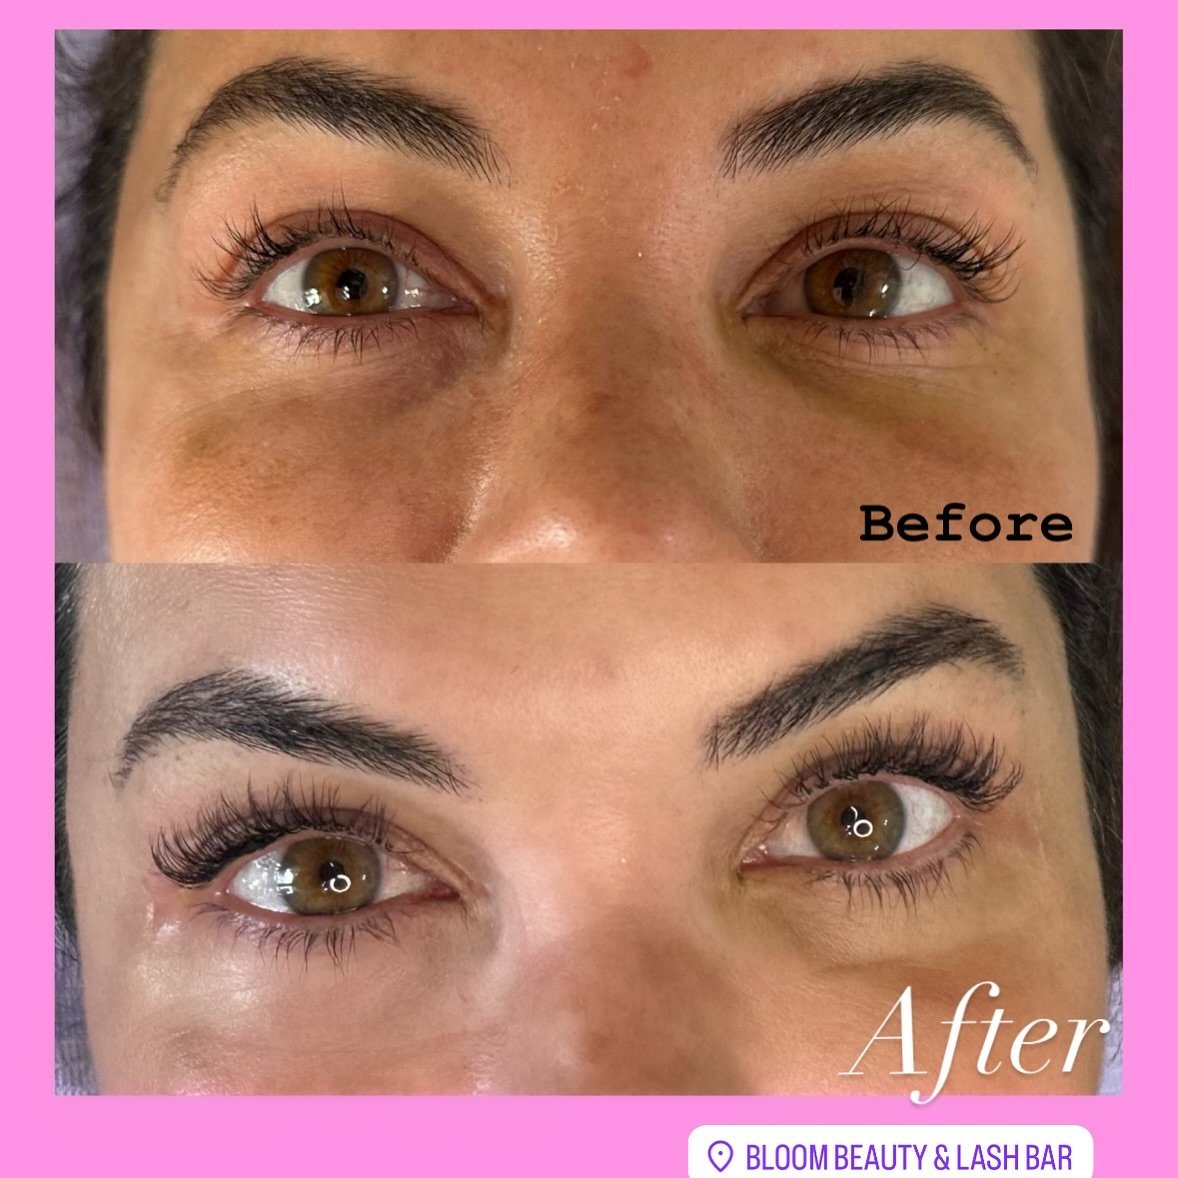 Classic Lashes are best for the most natural look! Classic lashes need to be filled every 2-3 weeks. Get summer ready and book your appointment! ✨🤗